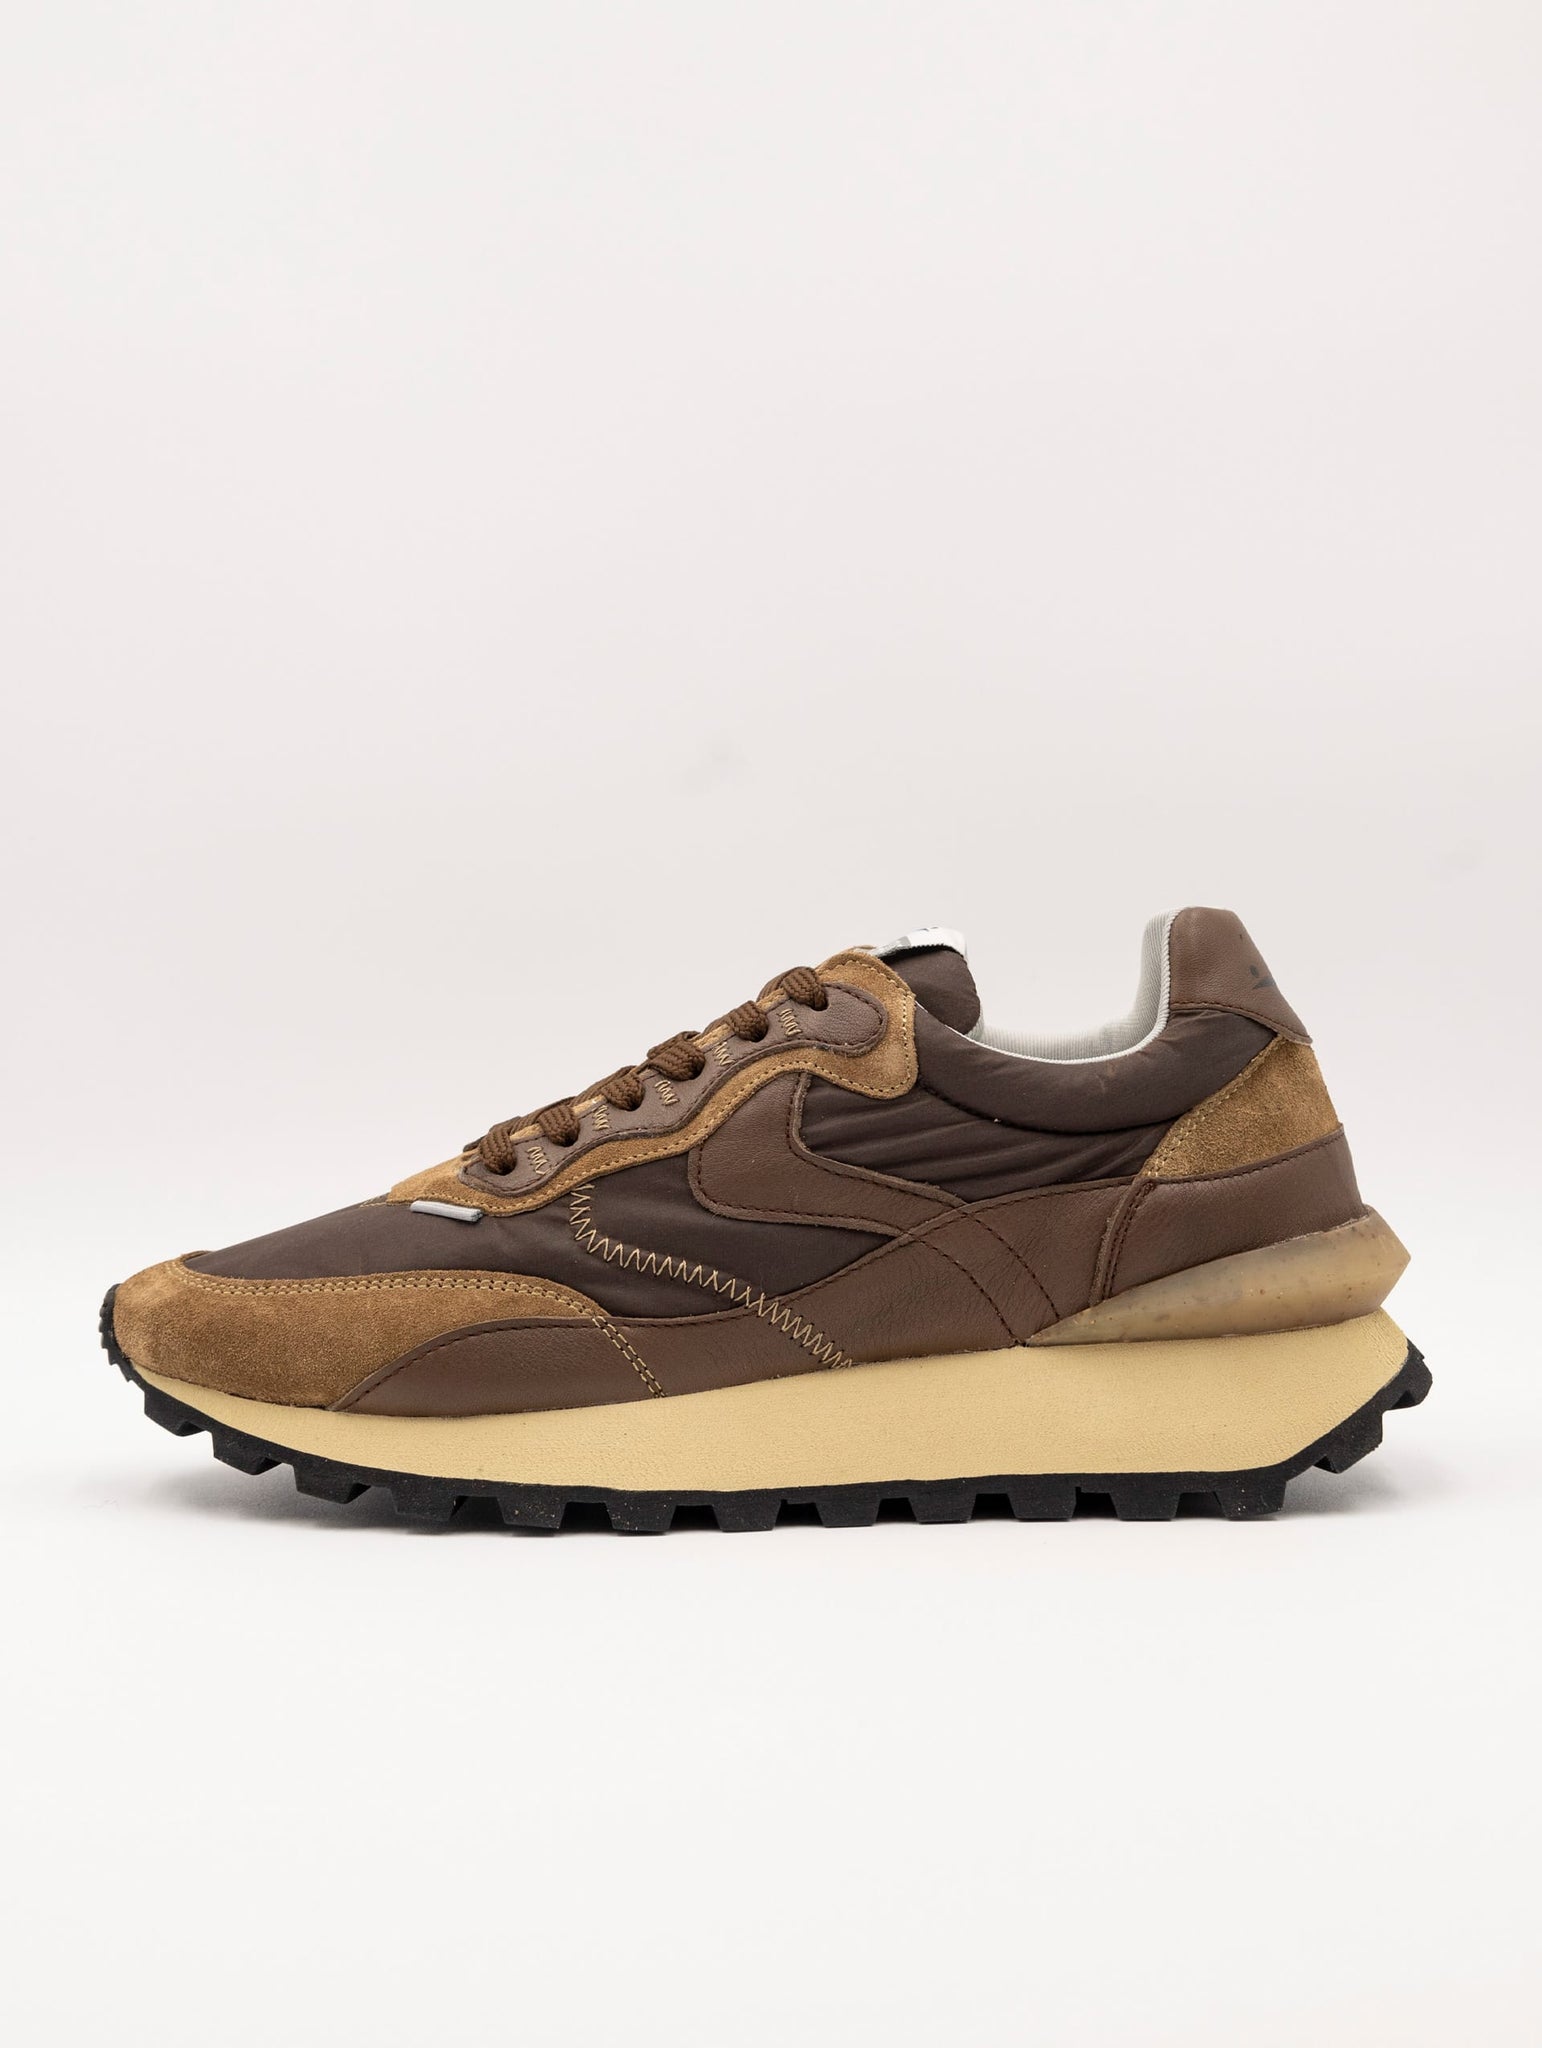 Sneakers Voile Blanche Qwark Hype Marrone e Tabacco